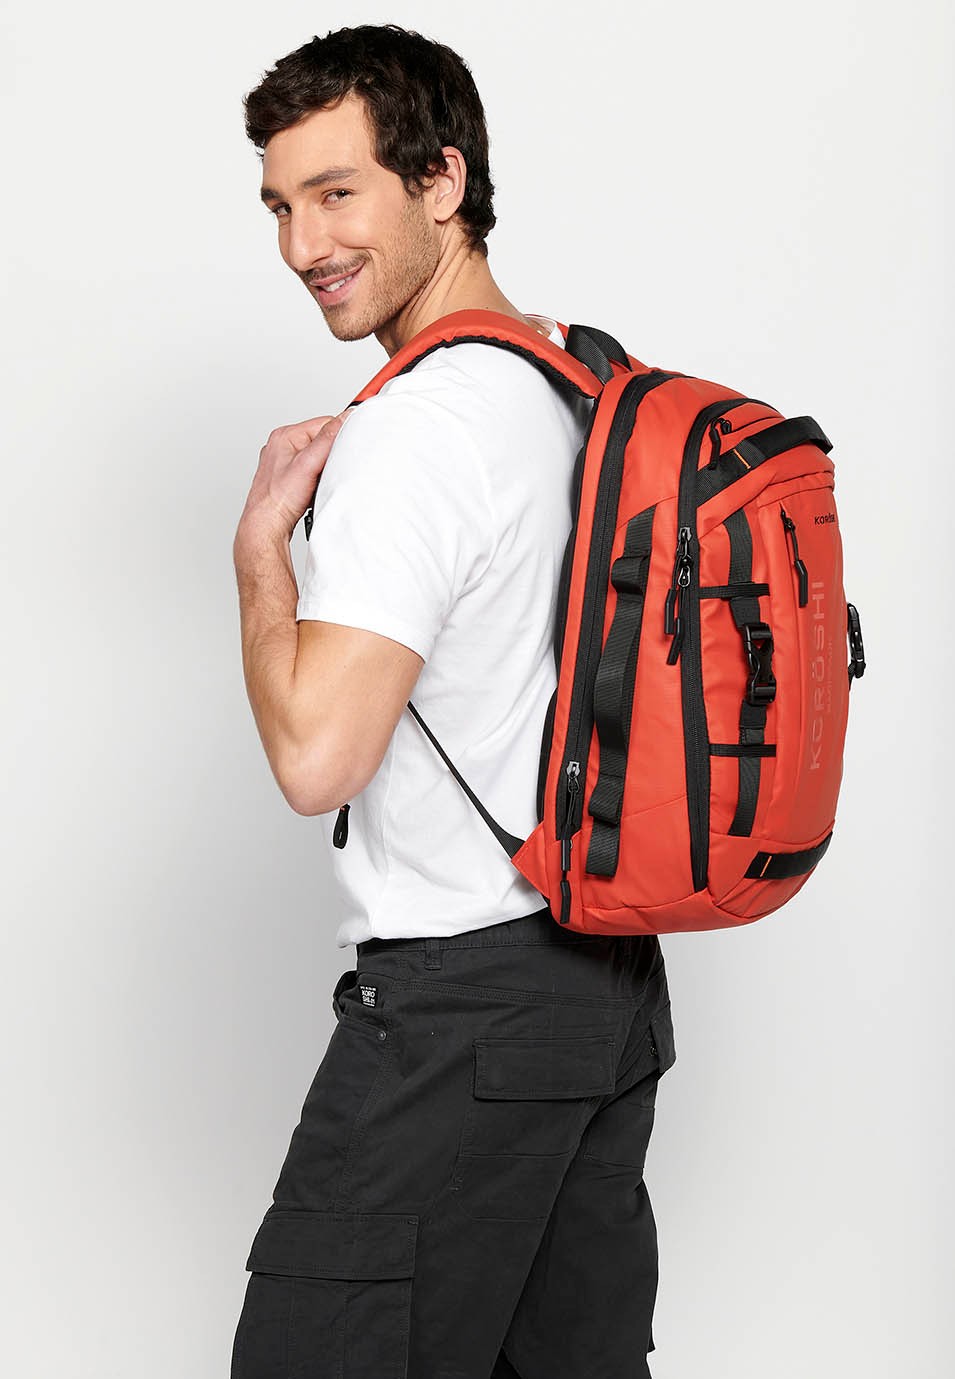 Koröshi backpack with two zippered compartments, one for a laptop and adjustable straps in Red 5